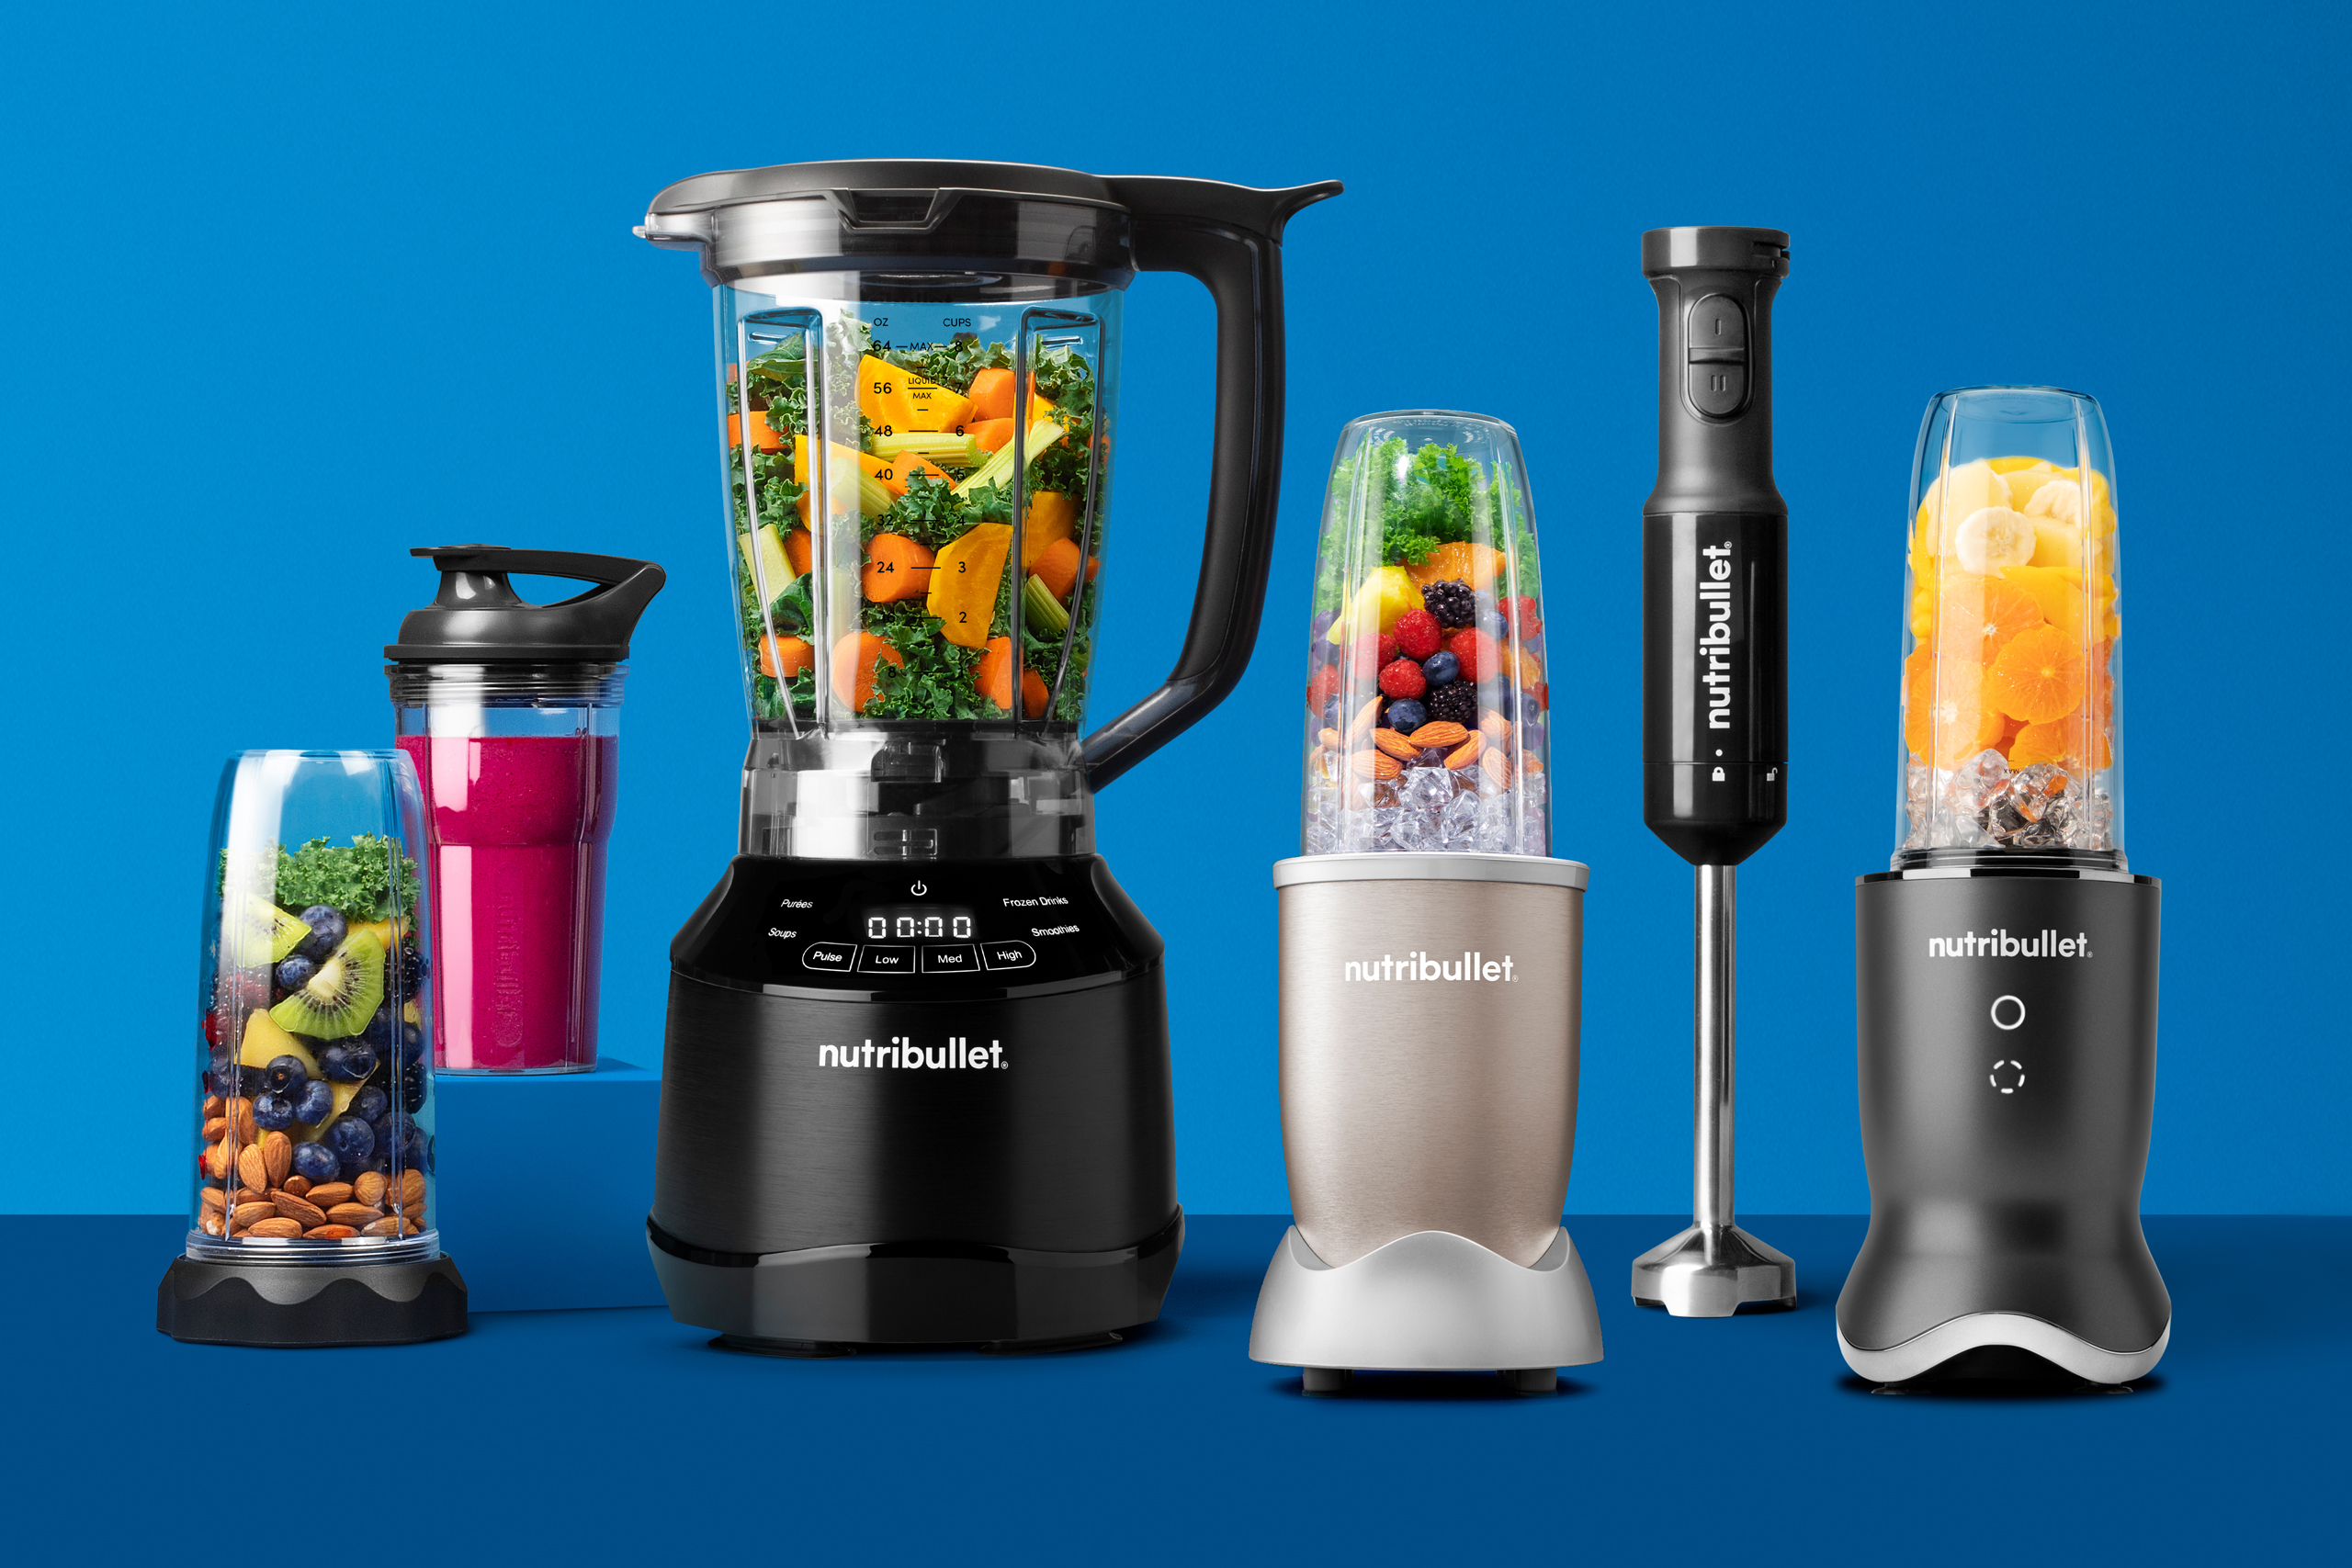 https://nbmedia.imgix.net/NB_Smart-Touch-Blender-Combo_900-champagne_Immersion_Ultra_Product-Family_Bluebkgd.jpg?ixlib=php-3.3.0&dl